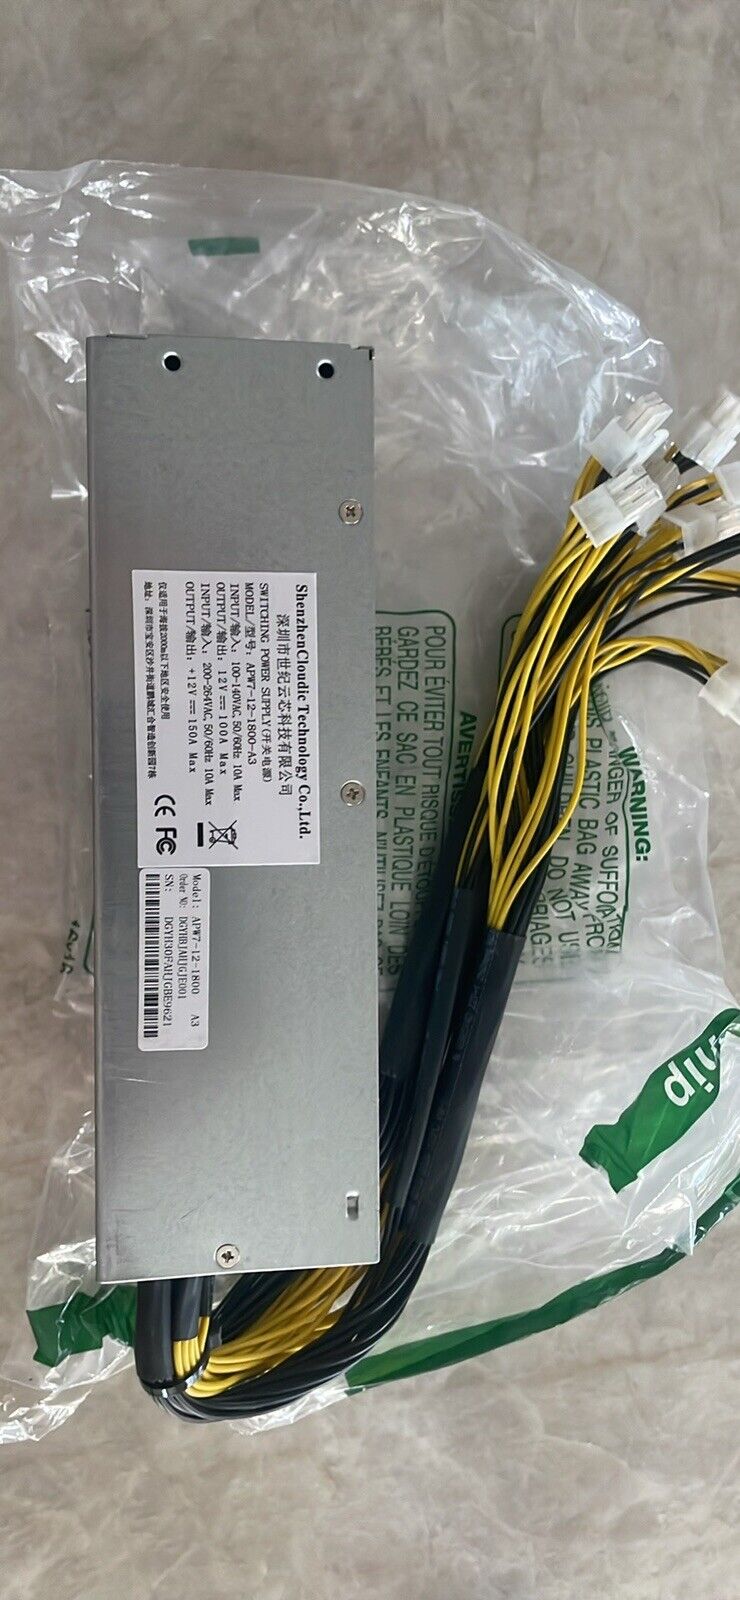 Bitmain APW7 1800W APW7-12-1800-A3 Power Supply for Antminer